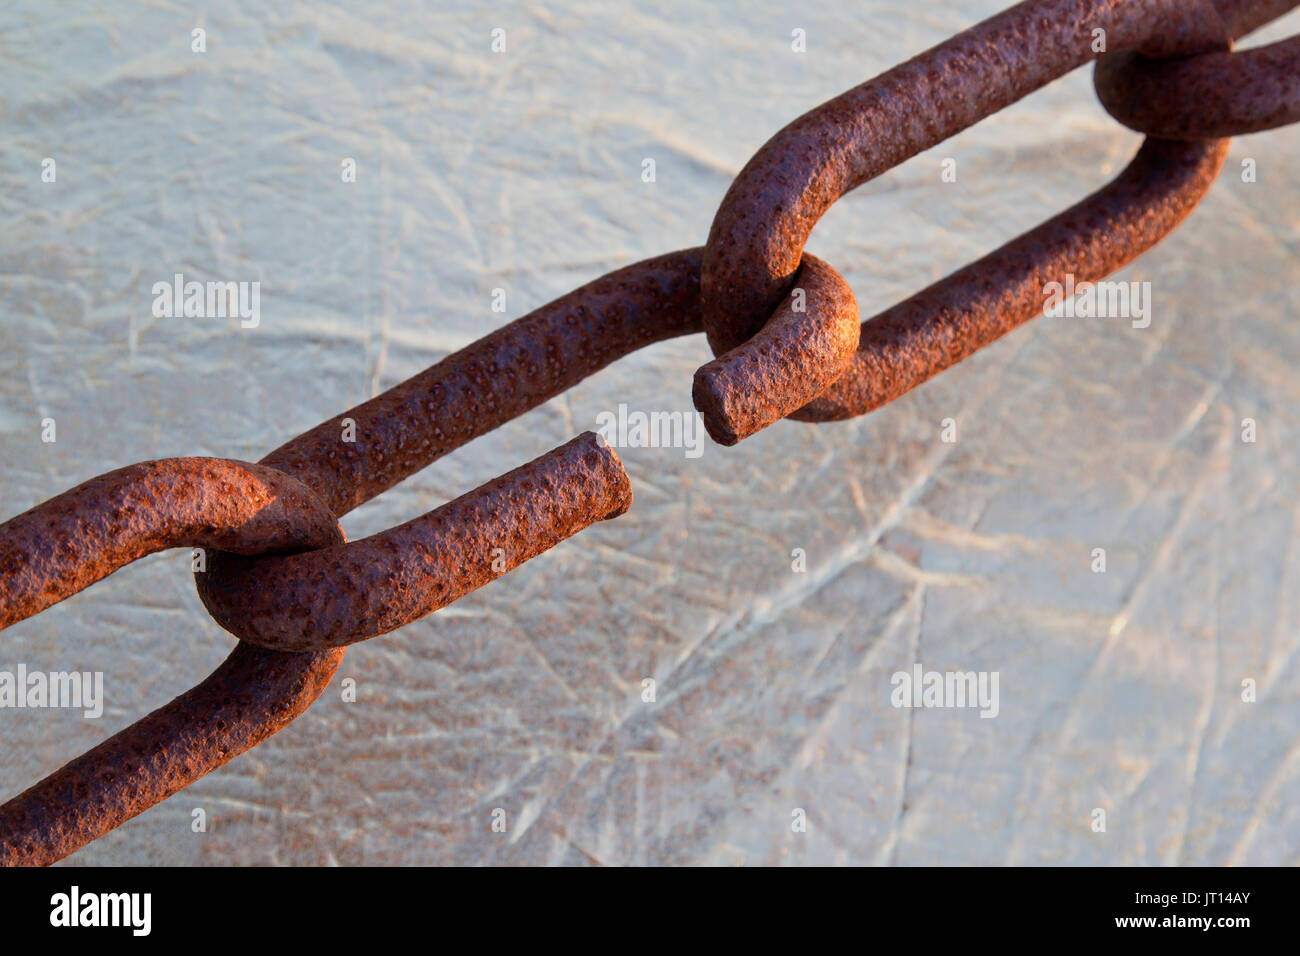 Connecting rusty chain links, exposed to Coastal Climate. Stock Photo